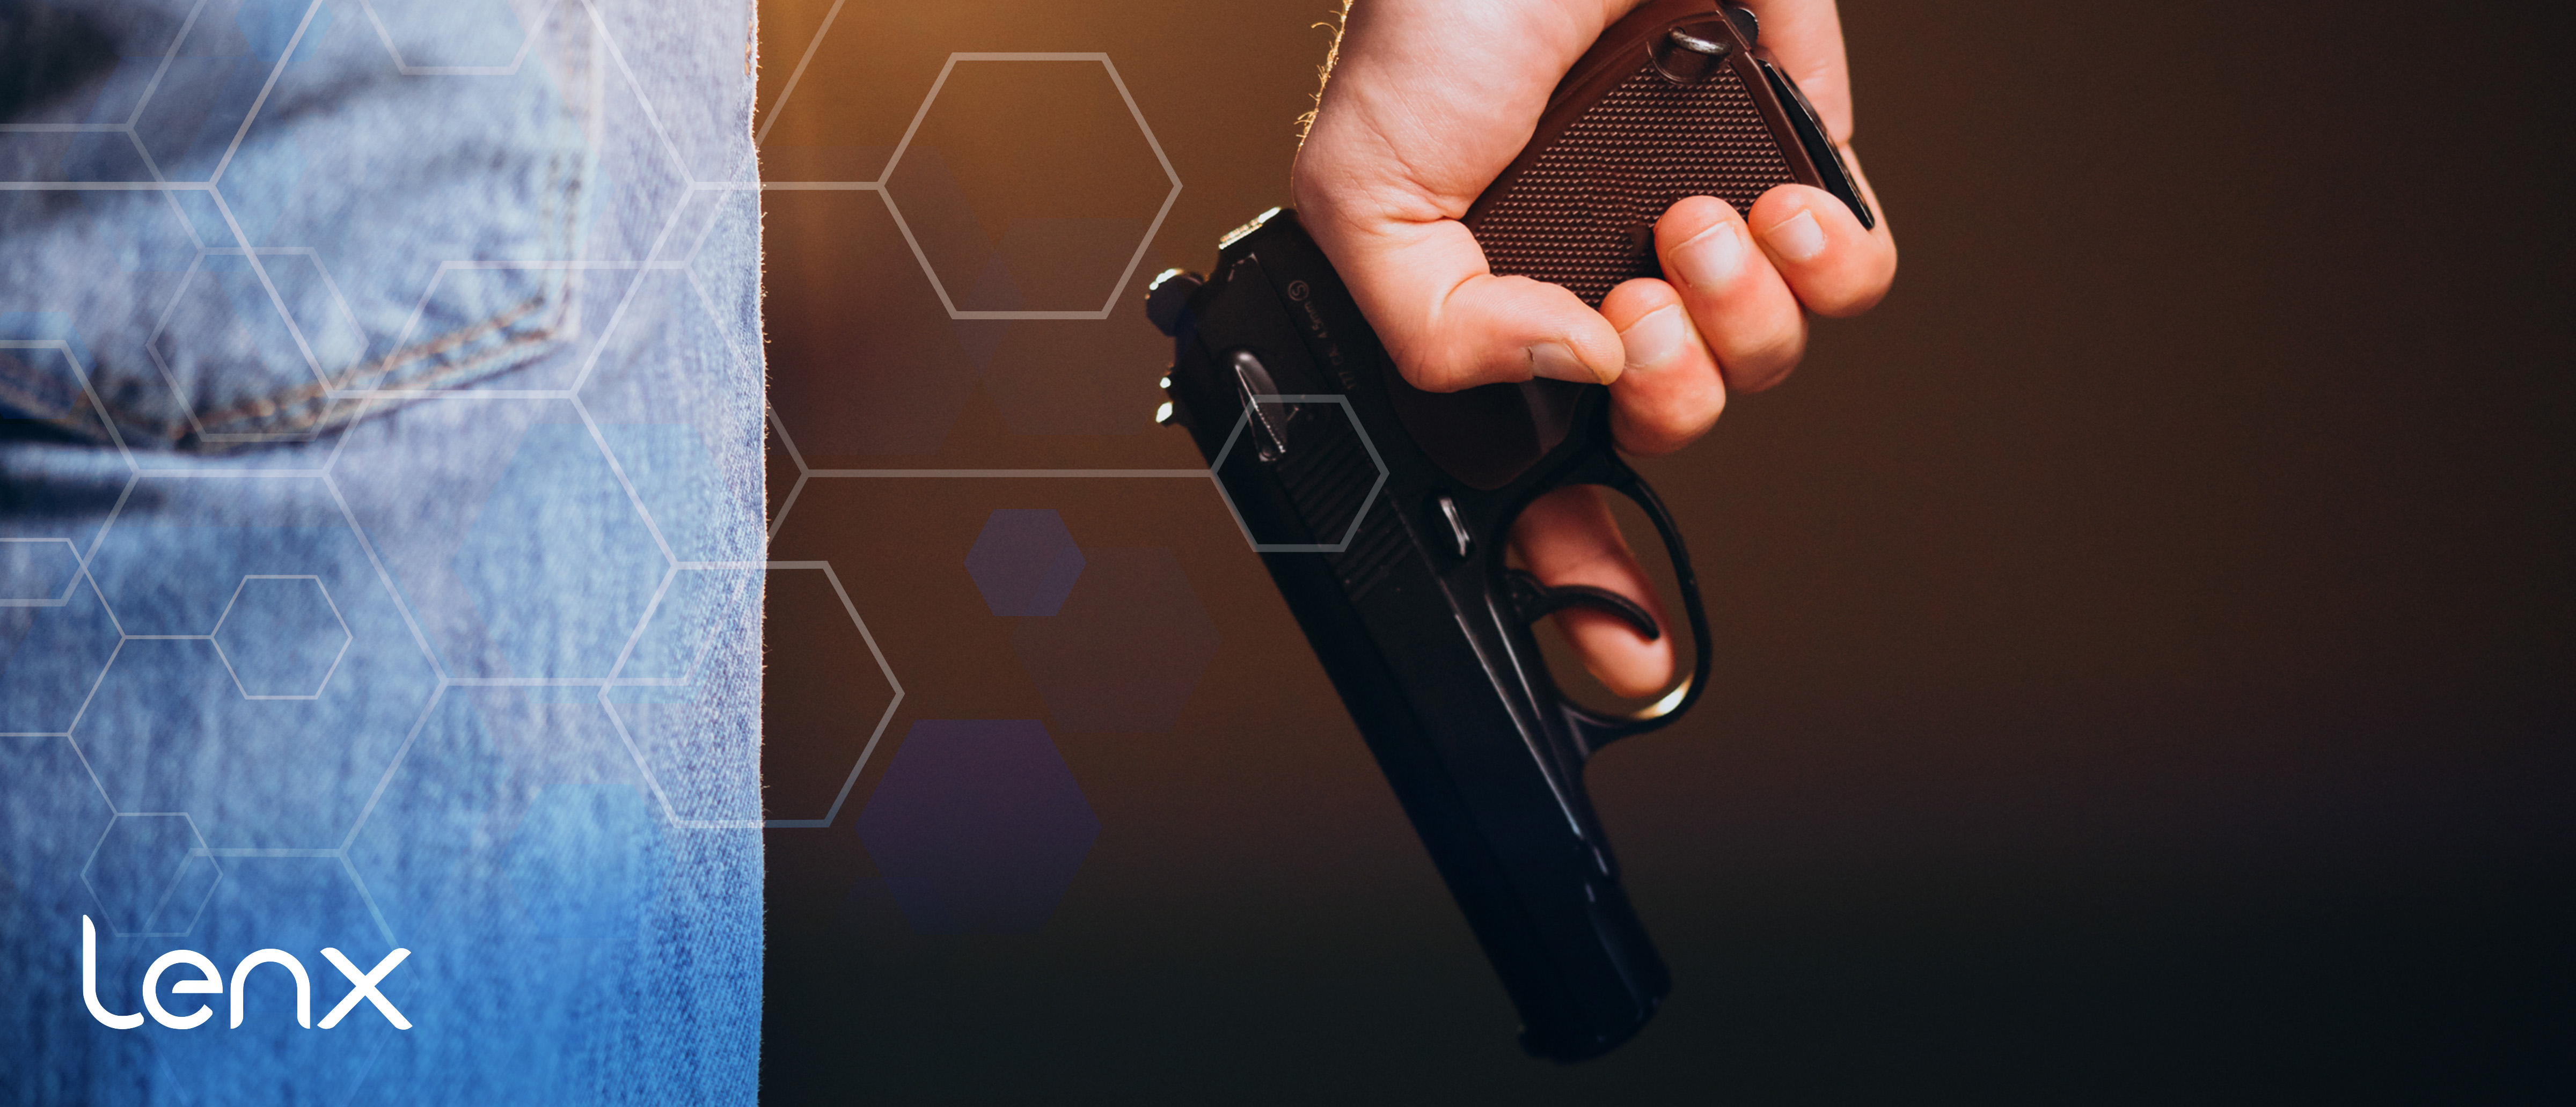 Why Accuracy Should Factor Into Choosing An AI Security, Active Shooter Detection System